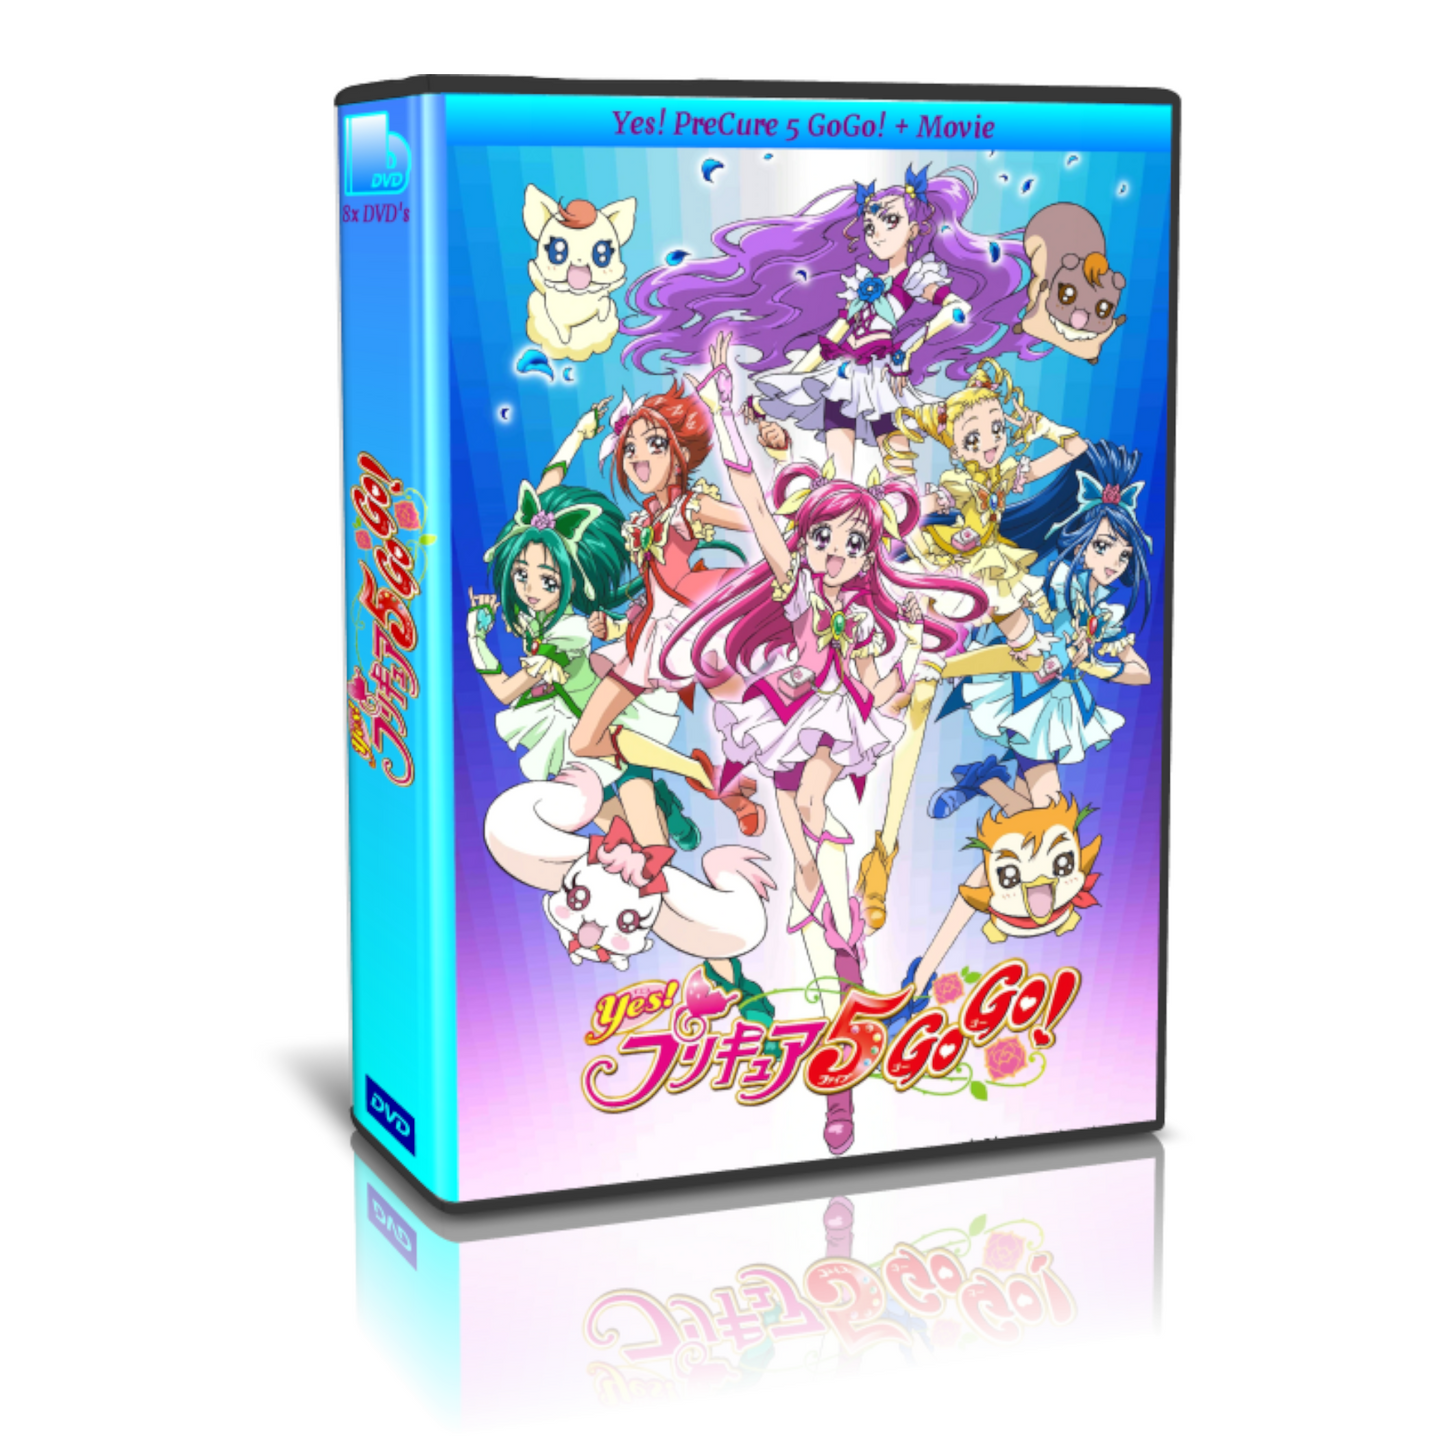 Yes! PreCure 5 Go Go! Complete TV Series & Movie DVD Set - RetroAnimation 